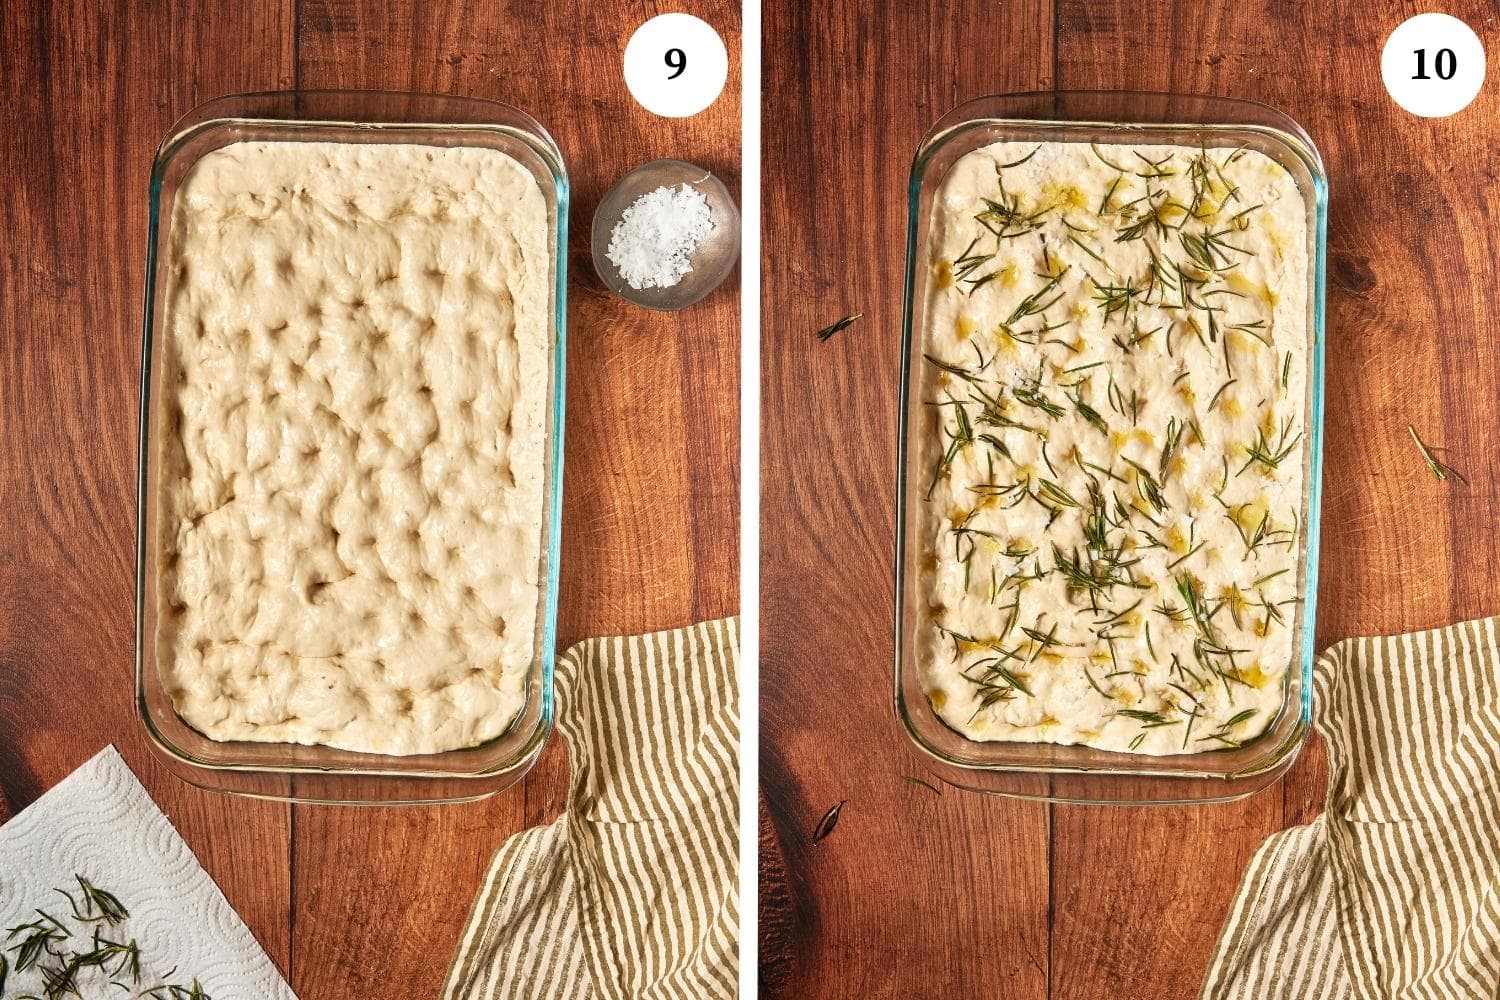 focaccia bread procedure: dough in a pan poked on top. next photo is dough in a pan is drizzled with olive oil and rosemary leaves.